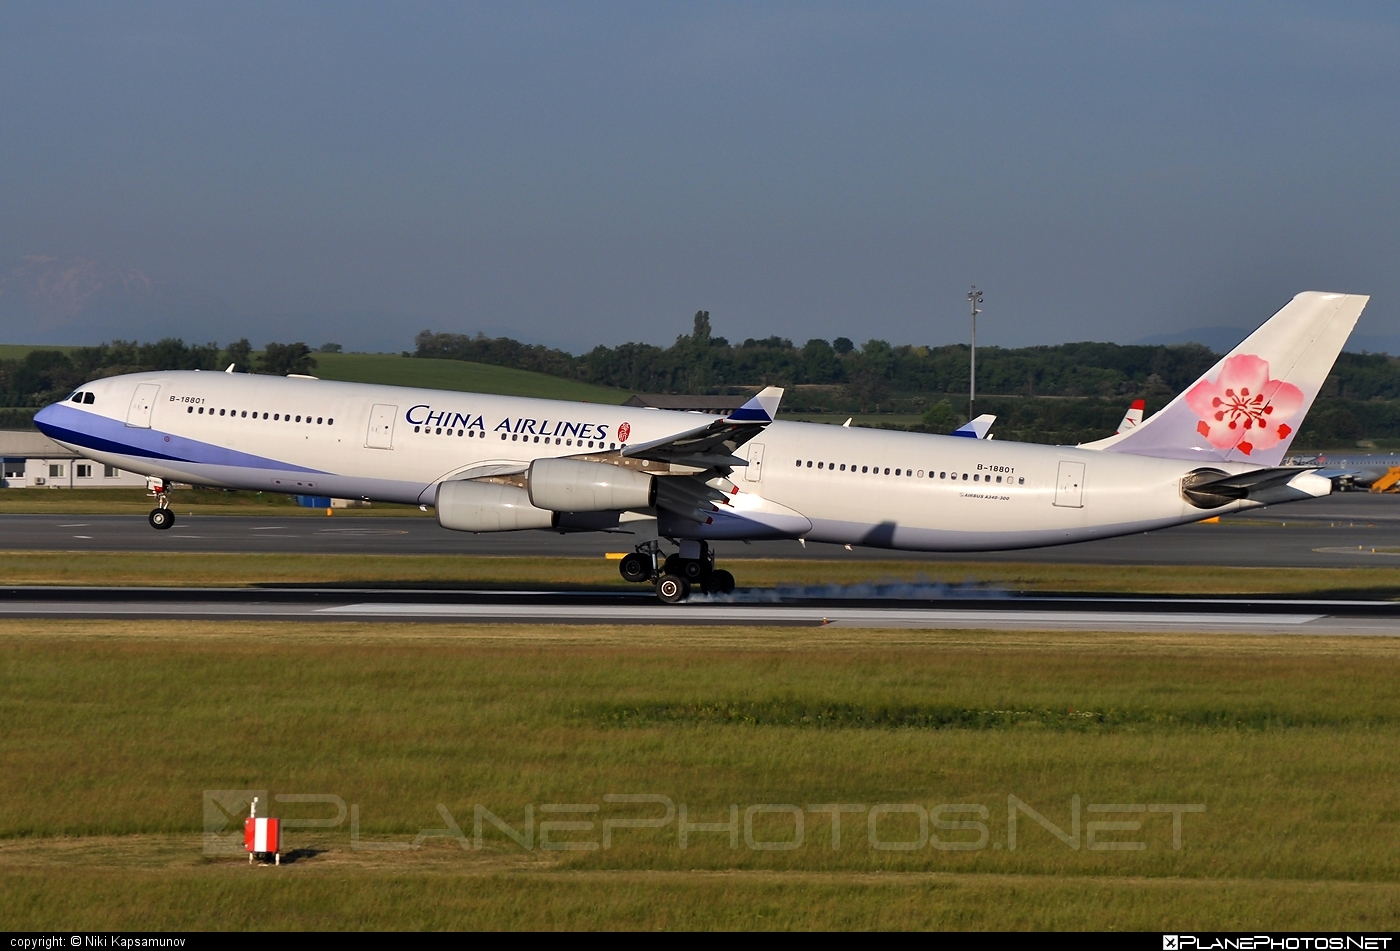 Airbus A340-313E - B-18801 operated by China Airlines #a340 #a340family #airbus #airbus340 #chinaairlines